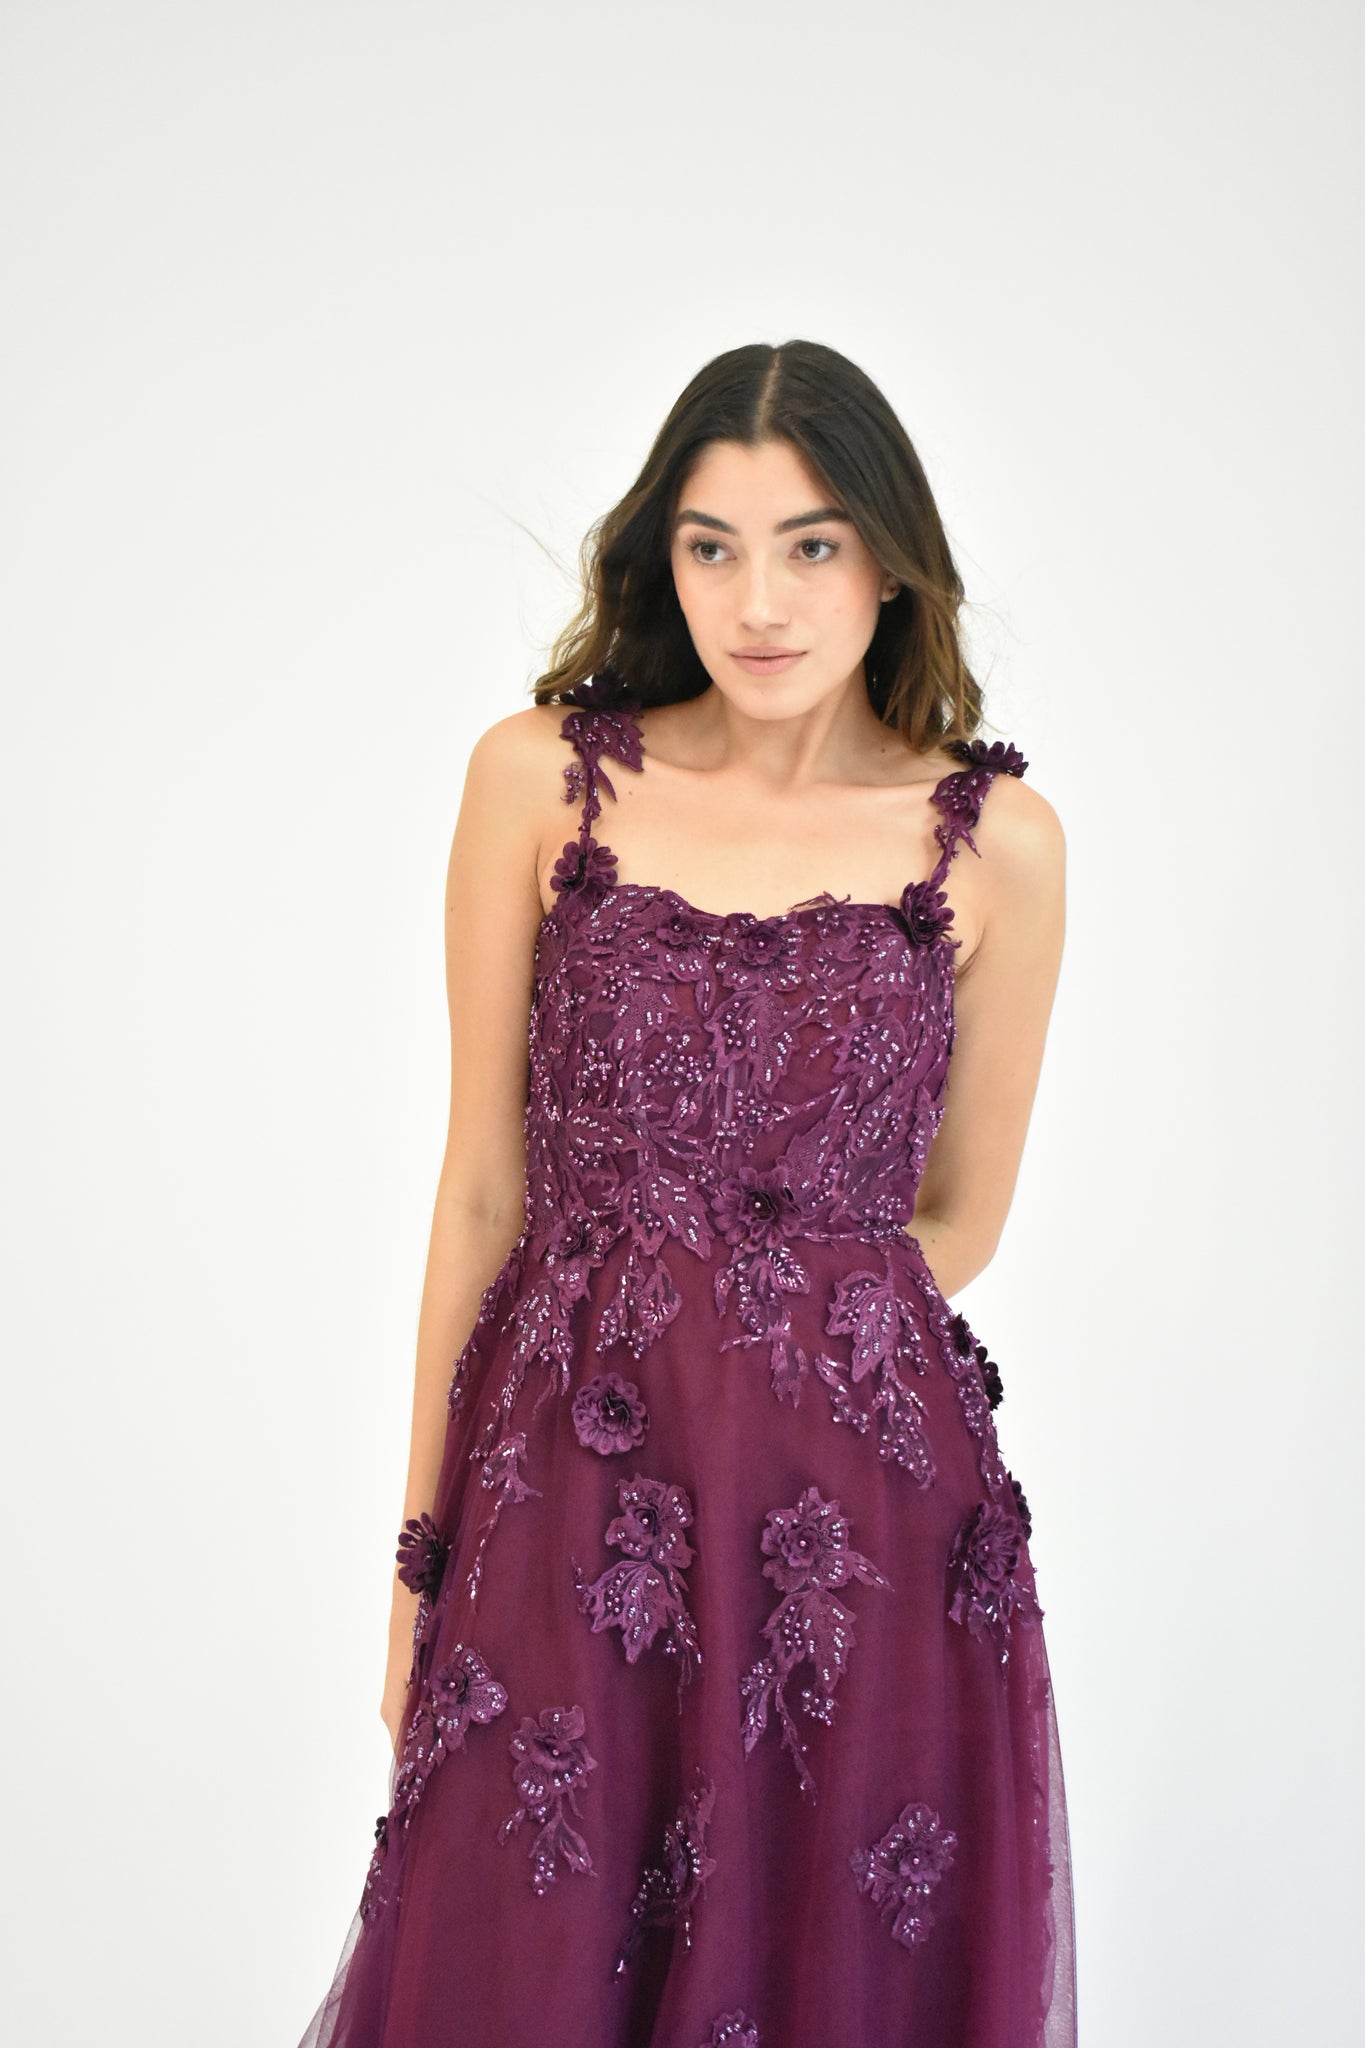 DARK PURPLE TULLE BALLGOWN WITH EMBROIDERY 3D DETAILS